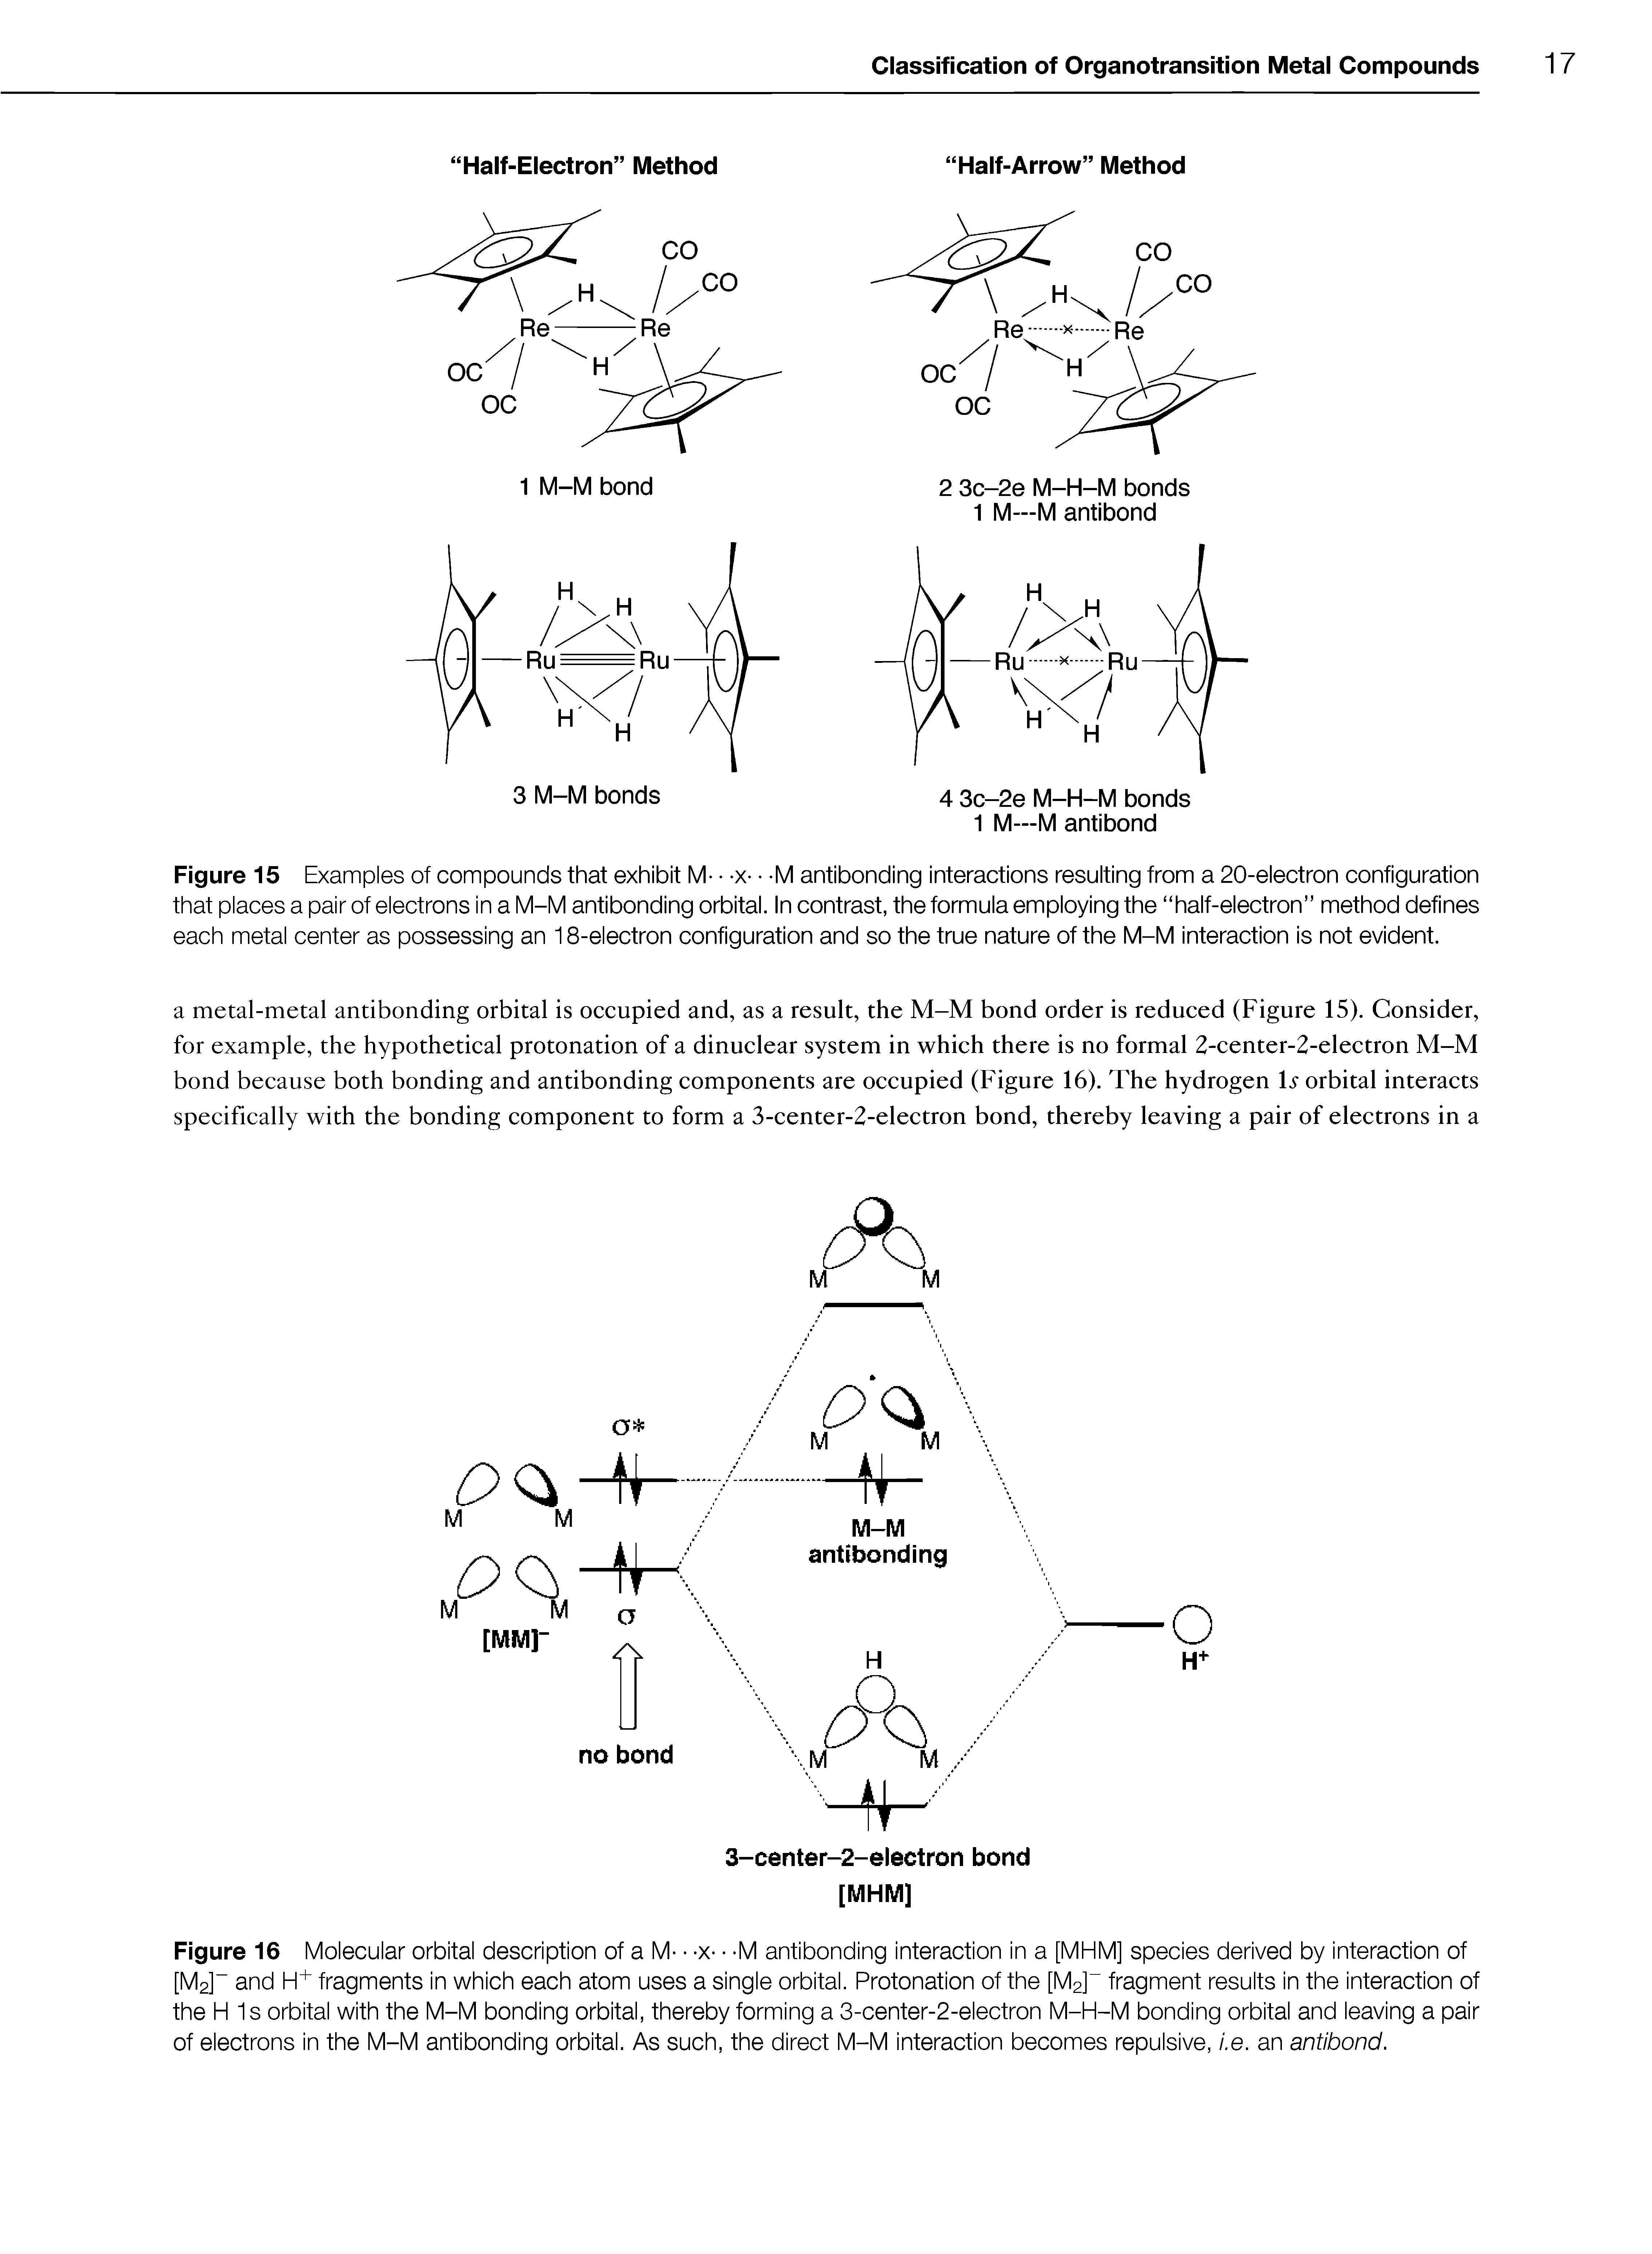 Figure 15 Examples of compounds that exhibit M- -x- -M antibonding interactions resulting from a 20-electron configuration that places a pair of electrons in a M-M antibonding orbital. In contrast, the formula employing the half-electron method defines each metal center as possessing an 18-electron configuration and so the true nature of the M-M interaction is not evident.